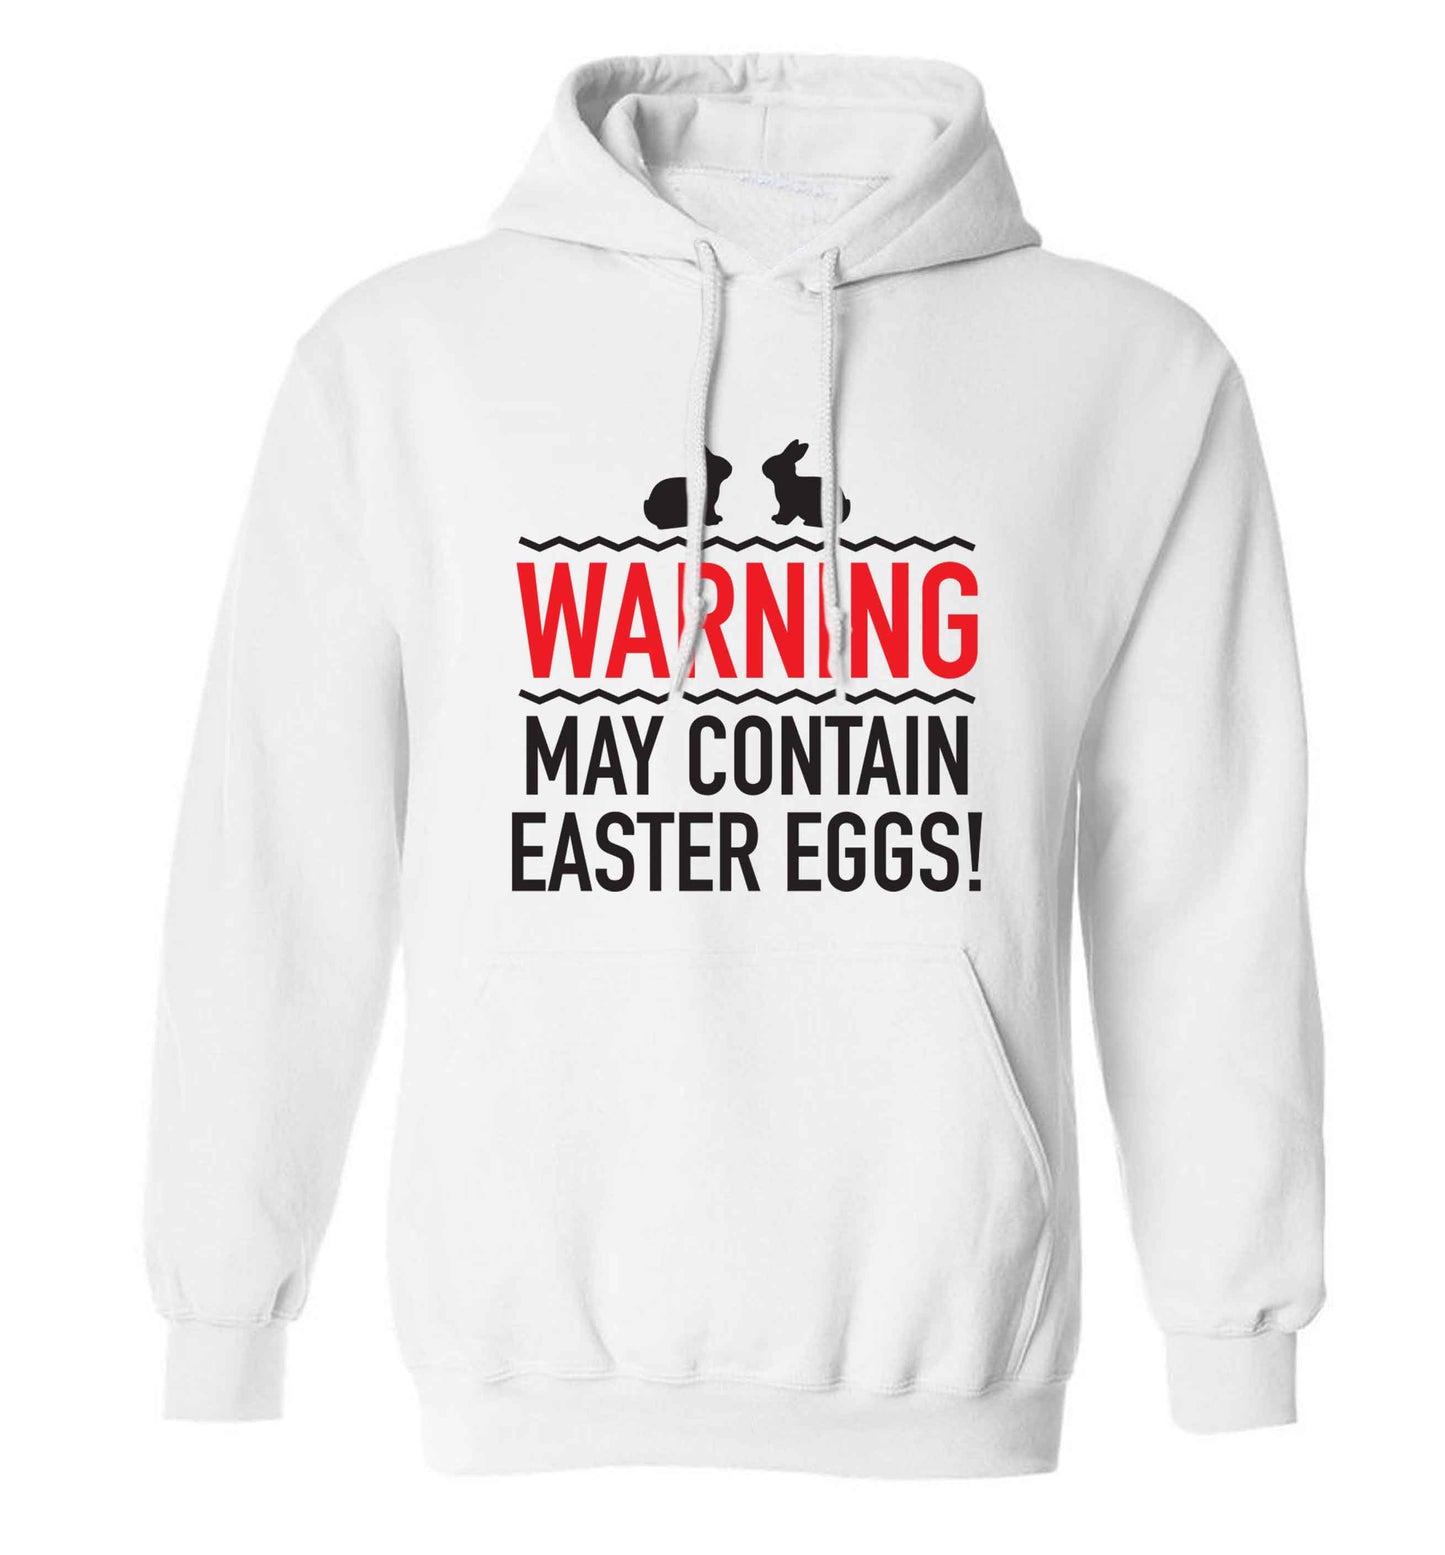 Warning may contain Easter eggs adults unisex white hoodie 2XL